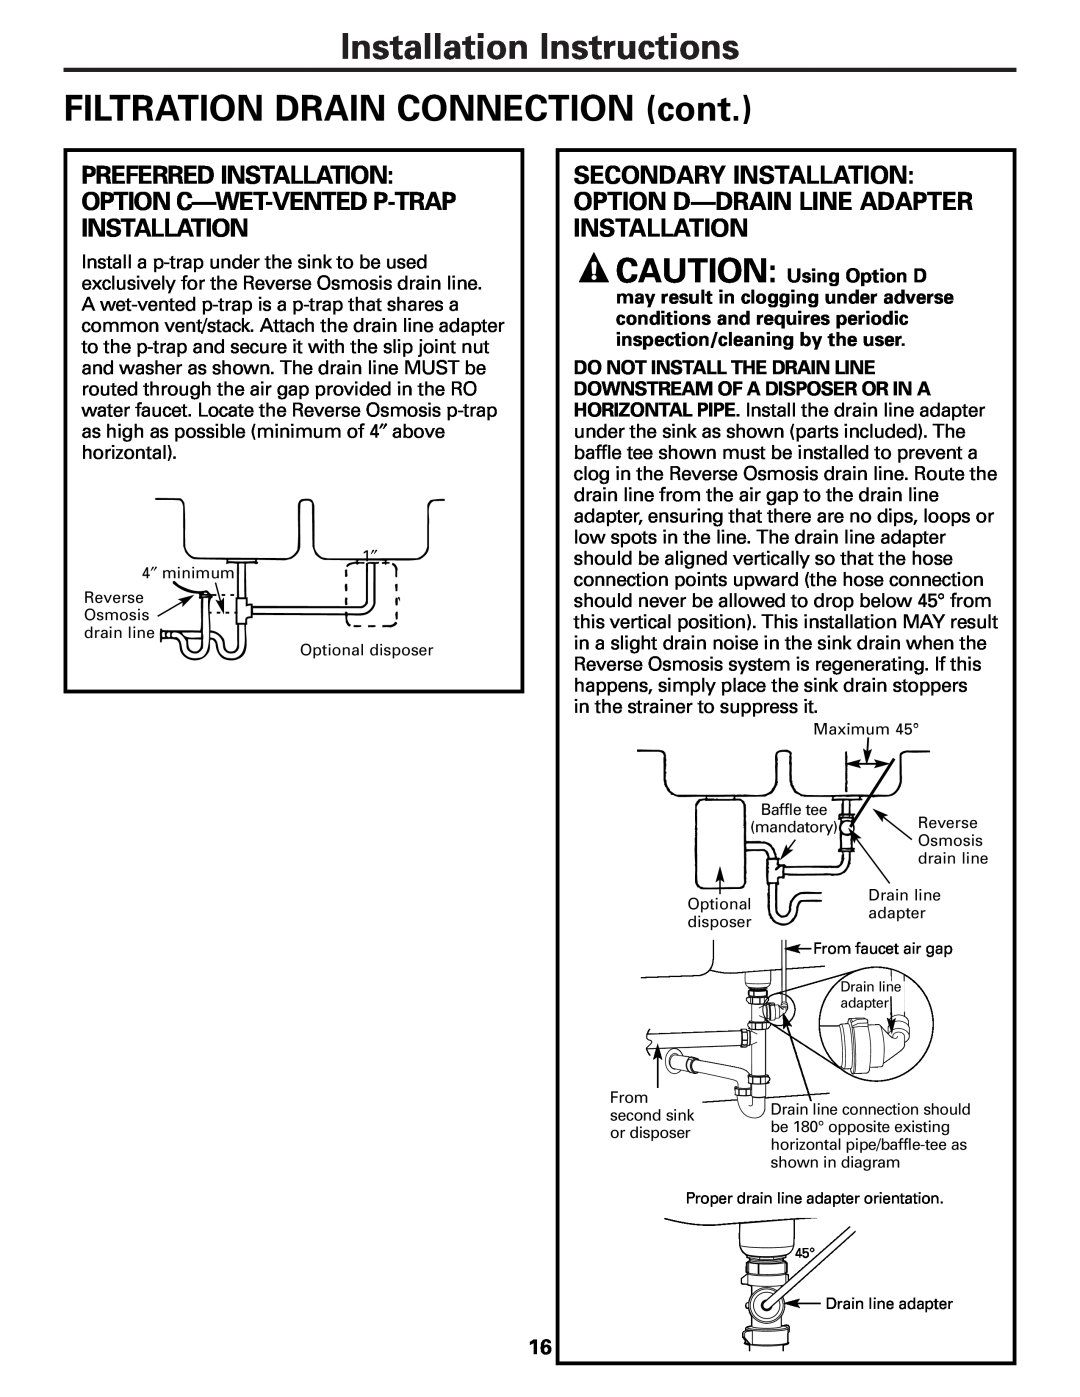 GE PXRQ15F owner manual Installation Instructions FILTRATION DRAIN CONNECTION cont 